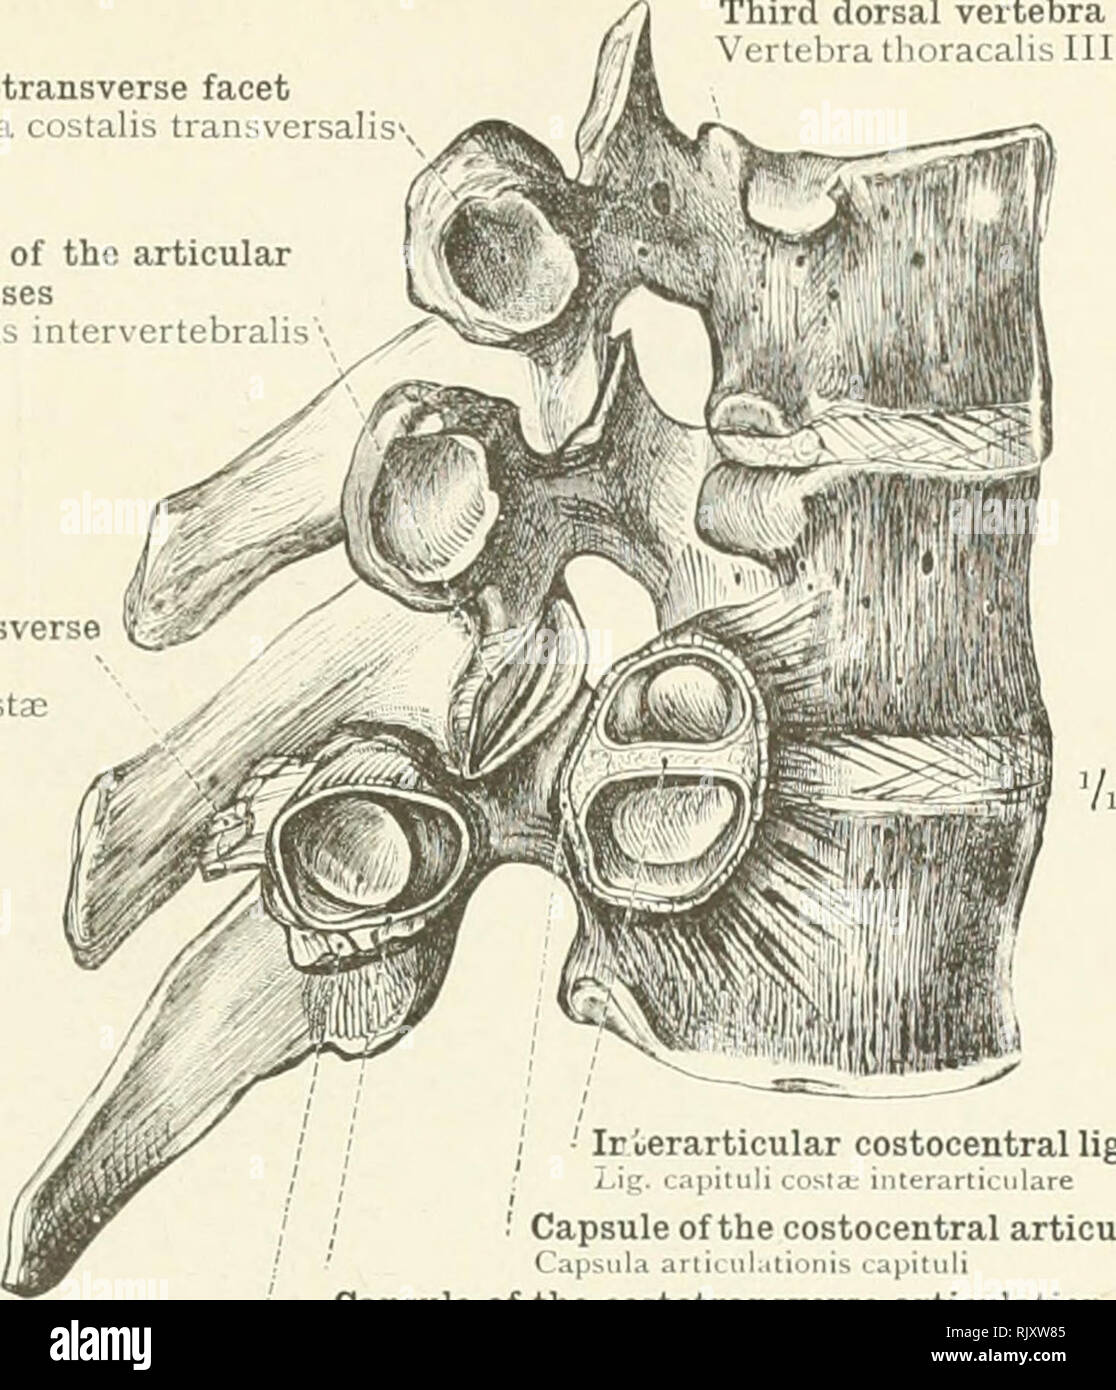 . An atlas of human anatomy for students and physicians. Anatomy. Costotransverse facet Fovea costalis transversal Capsule of the joint of the articular processes Capsula articulationis intervertebralis Posterior costotransverse ligament Lig. tuberculi costal Capsule of the joint of the articular pro:r3ses Capsula articulationis iLtervertebralis Fig. 411.—Third, Fourth, and Fifth Cervical Vertebra SEEN FROM THE RlGHT 'ClVi .. Anterior superior costotransverse ligament Lig. coslotransversarium antertus Ir Particular costocentral ligament / •' Capsule of the costocentral articulation Capsula ani Stock Photo